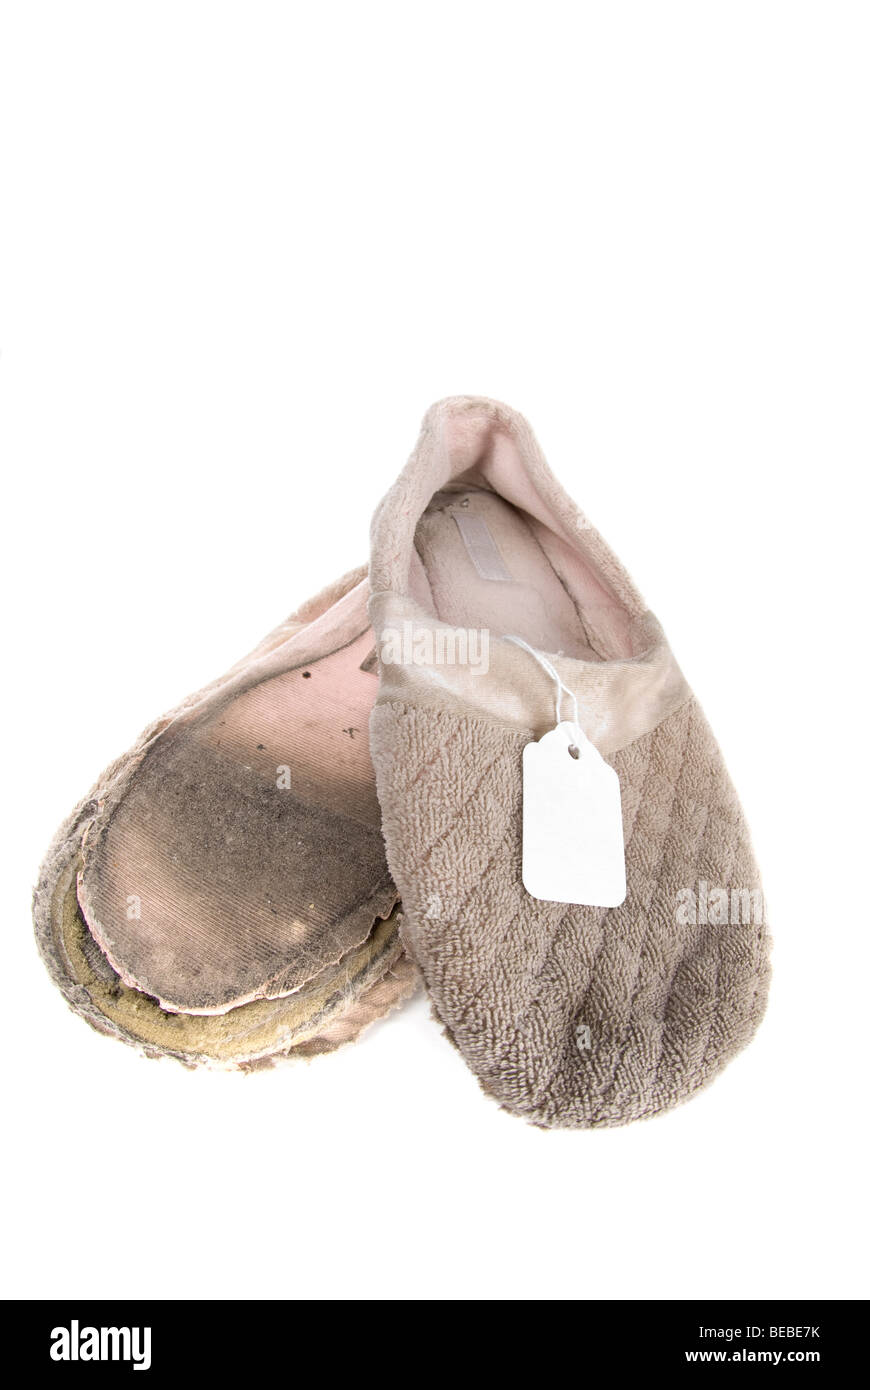 Old slippers with a price tag. Stock Photo